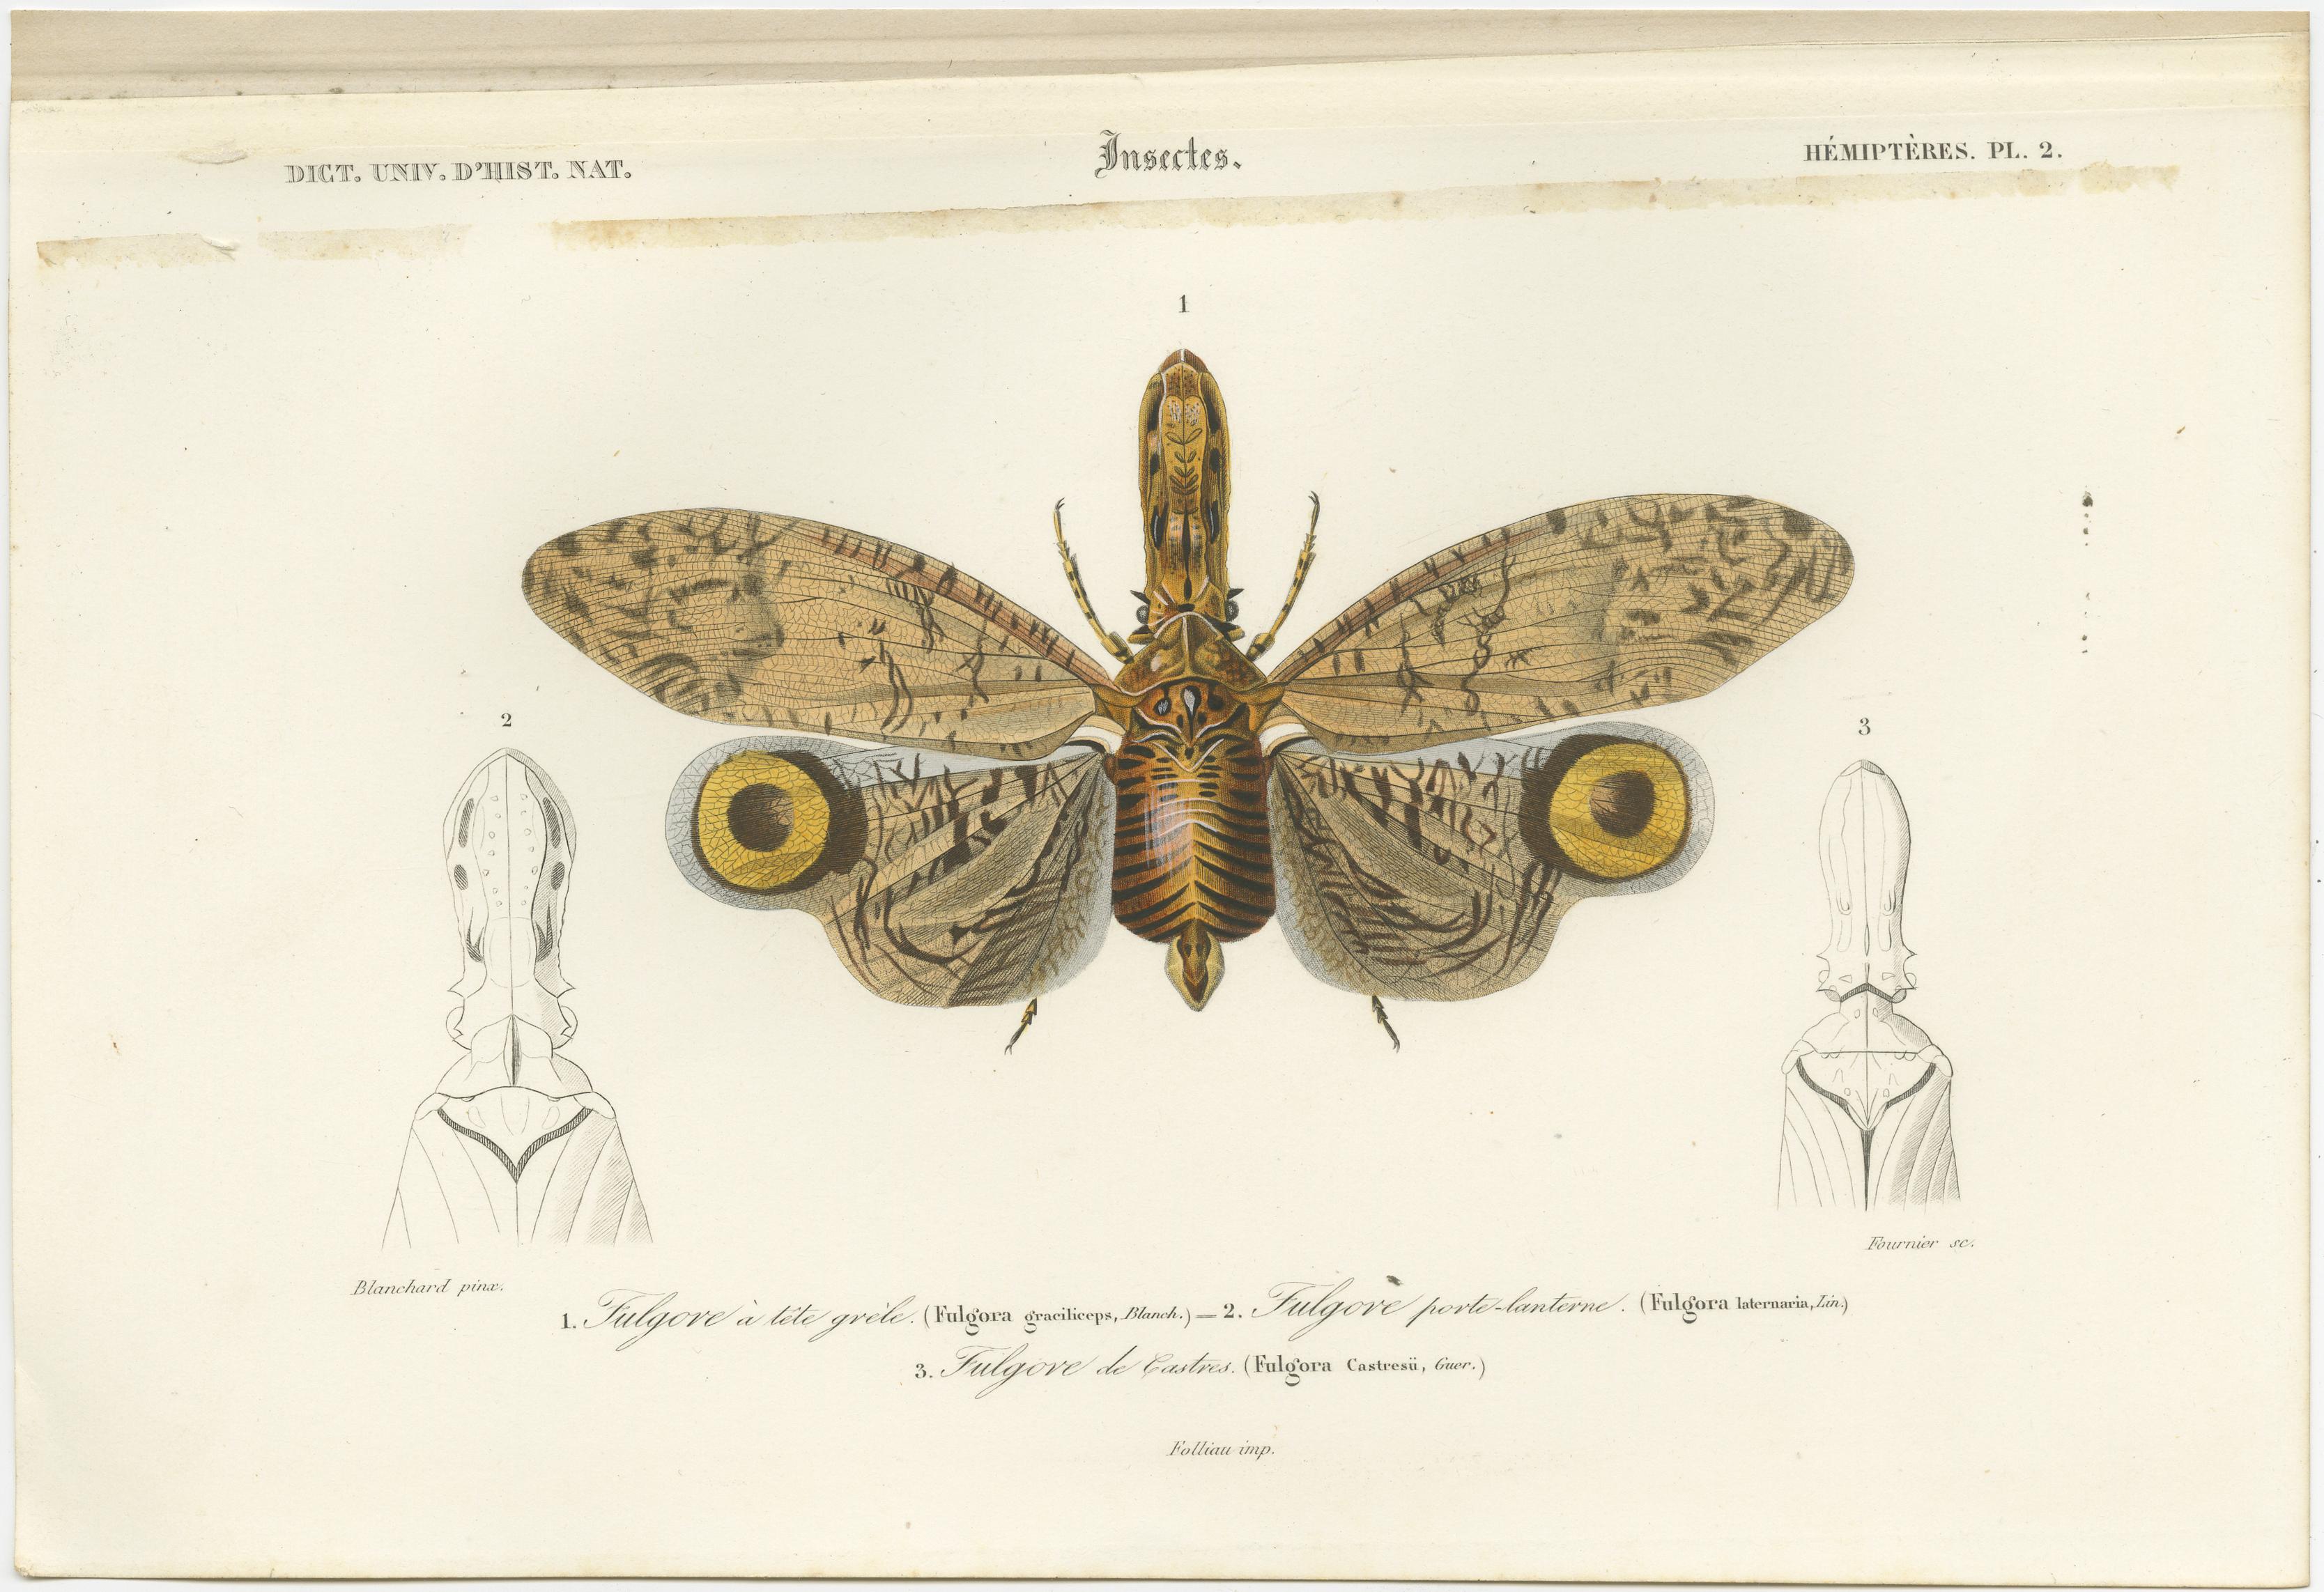 Set of 3 original antique prints of a lantern fly, cicada and the eastern dobsonfly. These prints originate from 'Dictionnaire universel d'Histoire Naturelle' by d'Orbigny. Published 1861. 

Charles Henry Dessalines d'Orbigny was a French botanist